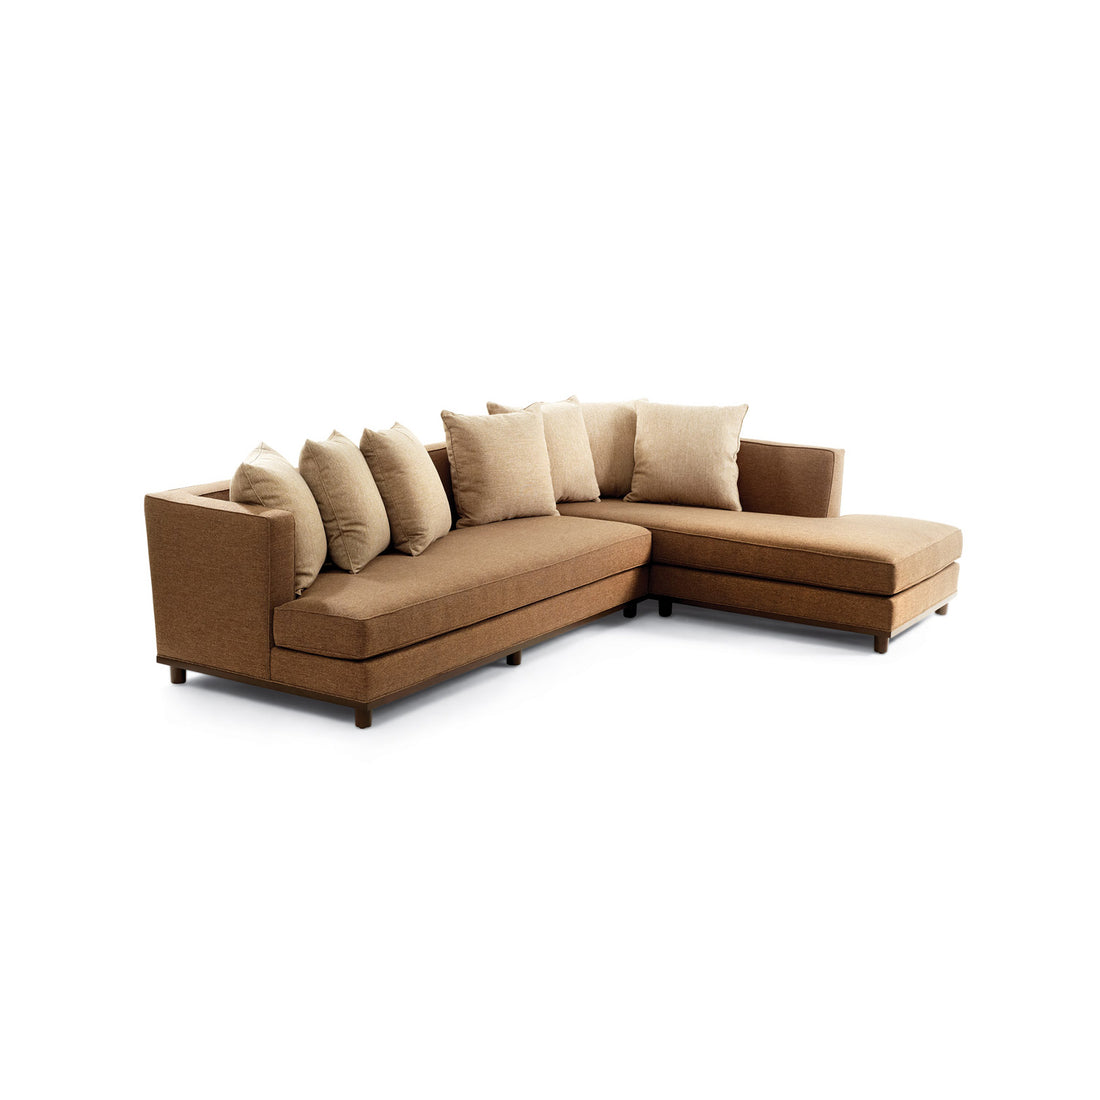 DB Daybed Sectional Sofa